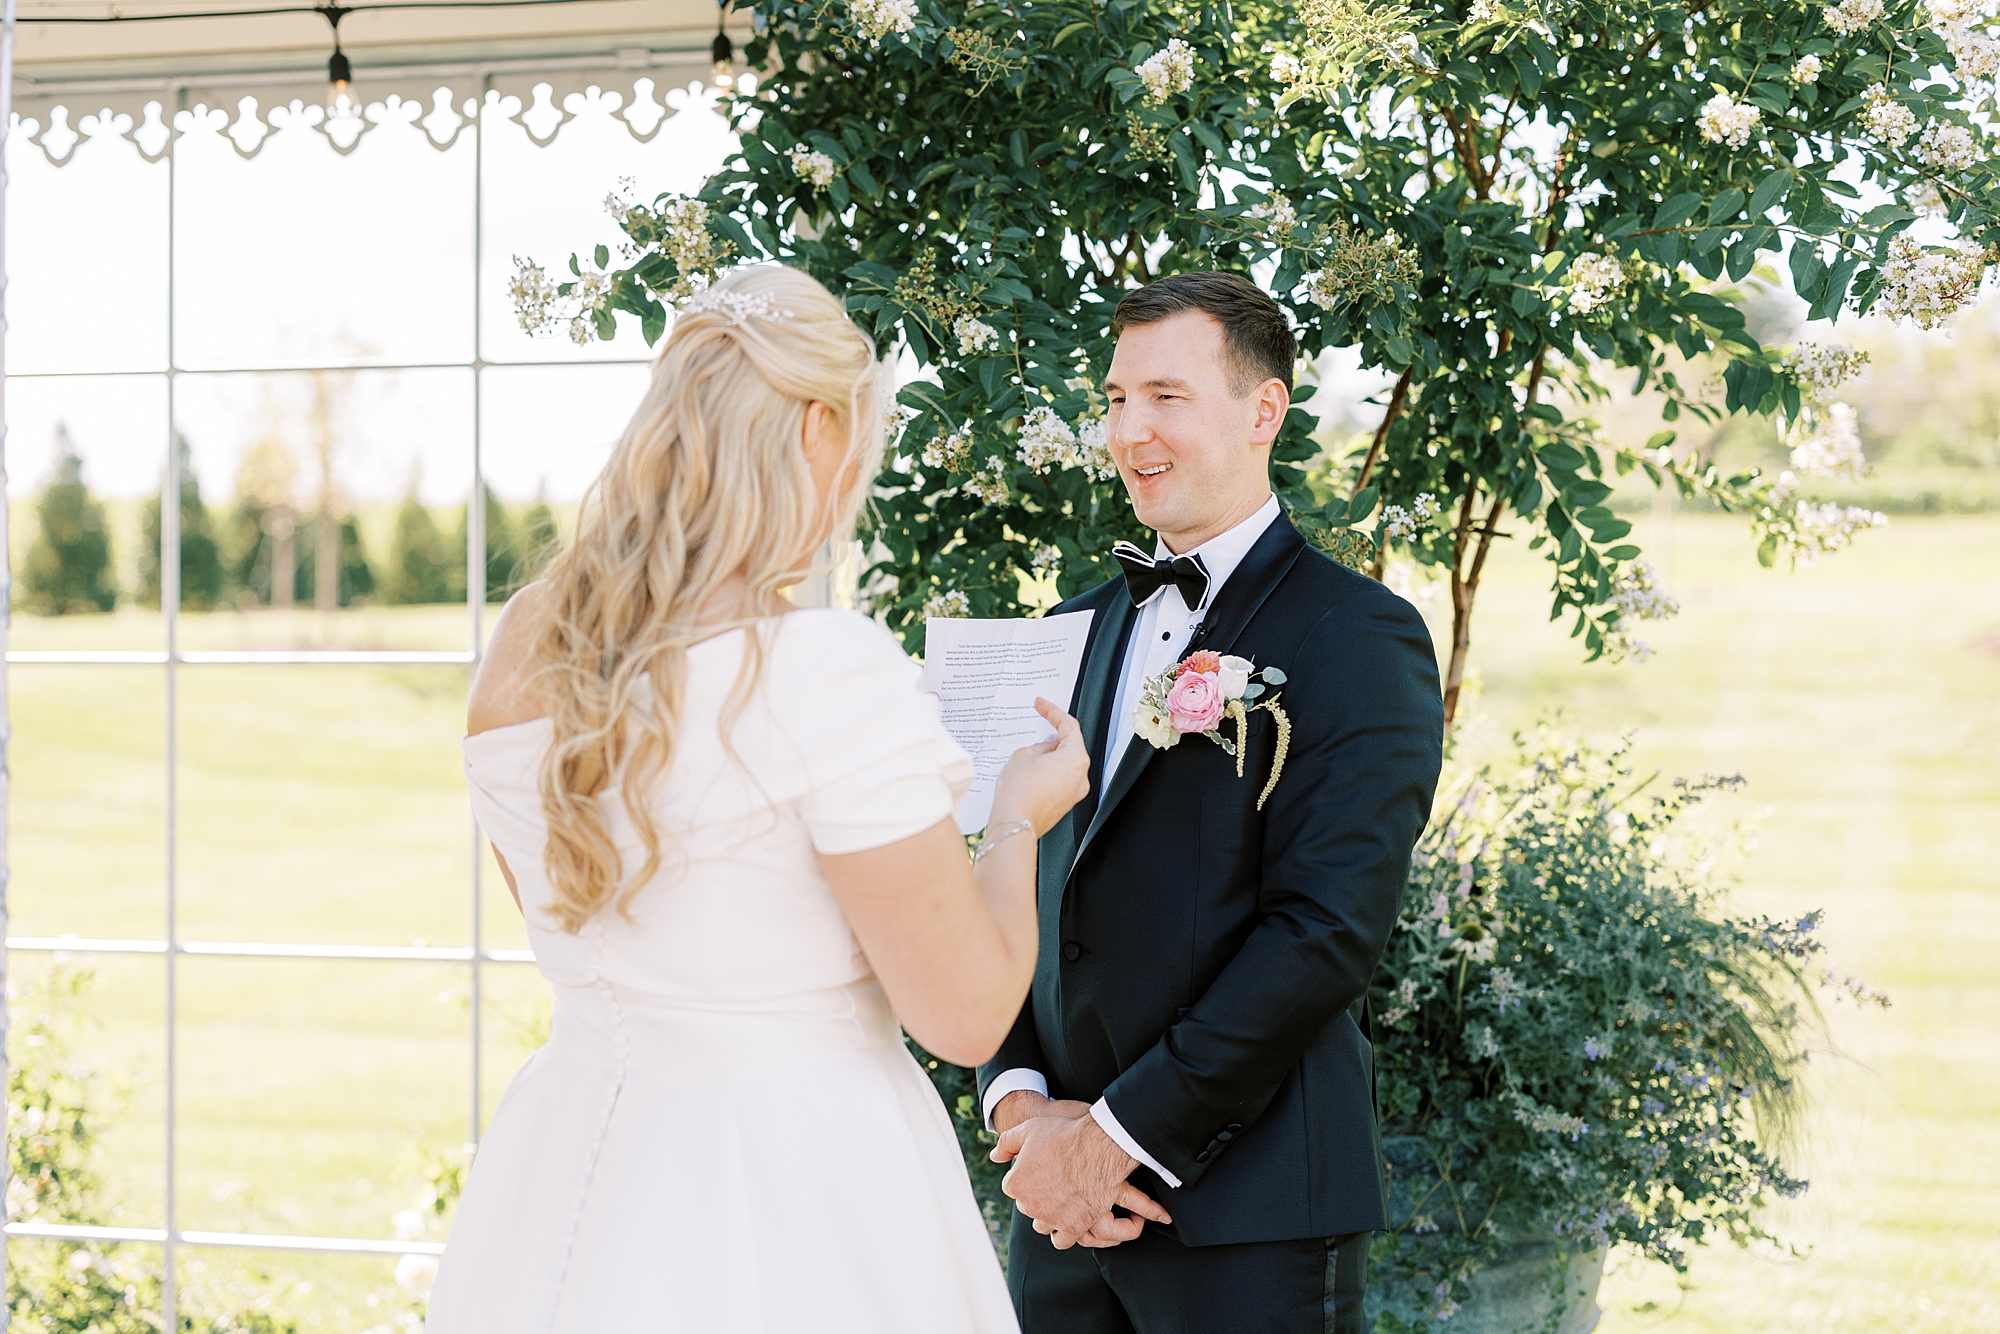 groom and bride read vow booklets during first look together on wedding day